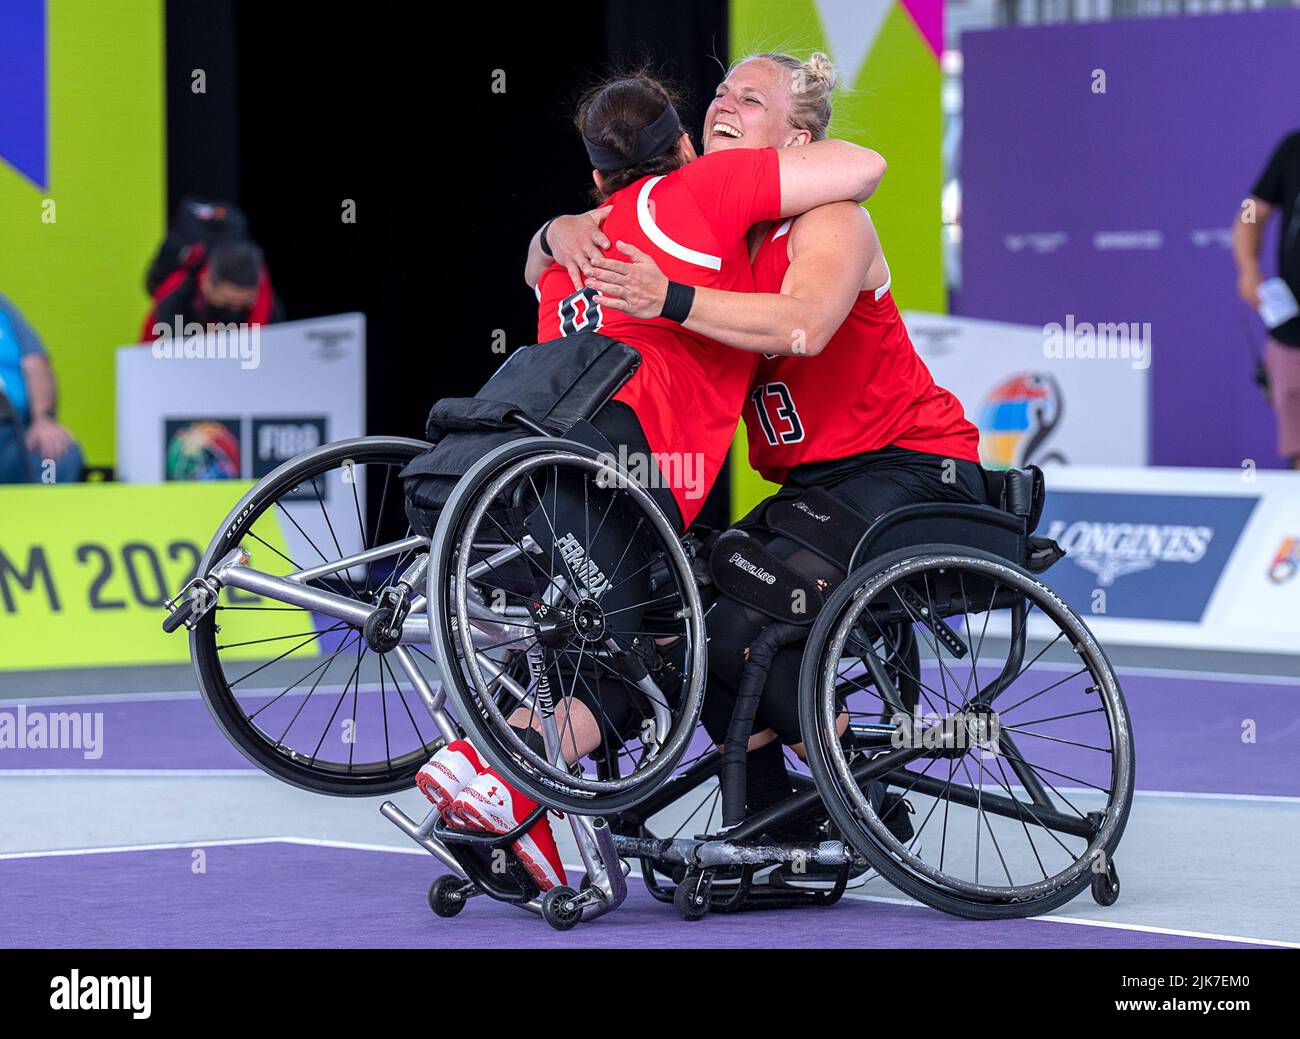 July 31, 2022, Birmingham, West Midlands, England: Canada's Kady Dandeneau, right, embraces teammate Tamara Steeves after defeating England 13-8 in women's 3x3 wheelchair basketball action at the Commonwealth Games in Birmingham, England on Sunday, July 31, 2022. (Credit Image: © Andrew Vaughan/The Canadian Press via ZUMA Press) Stock Photo